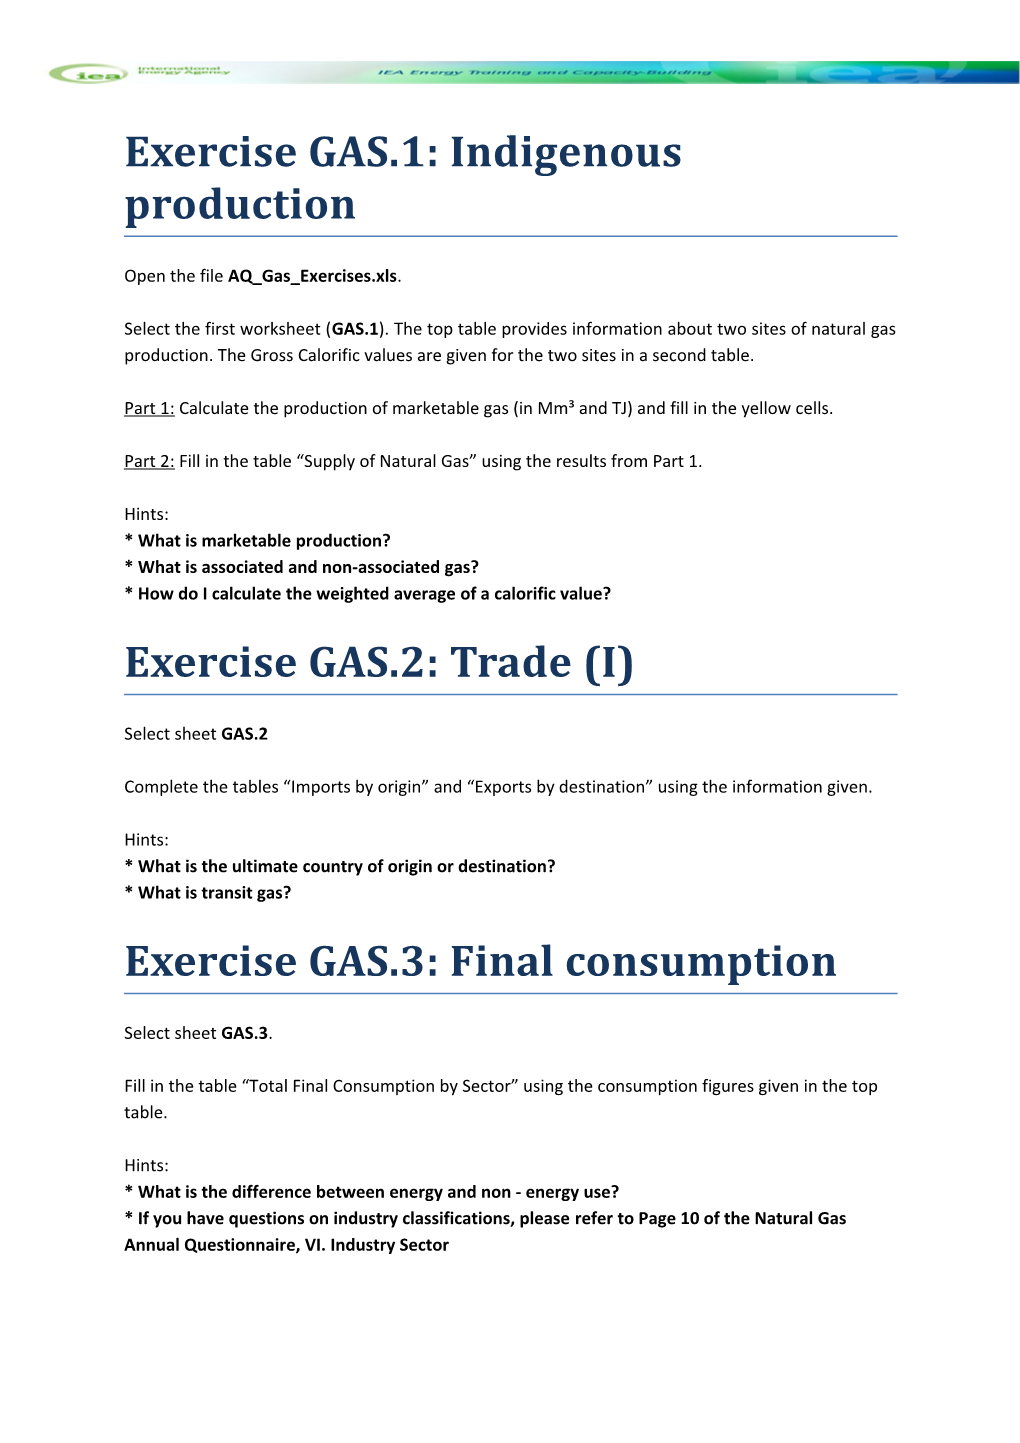 Annual Gas Questionnaire Exercises